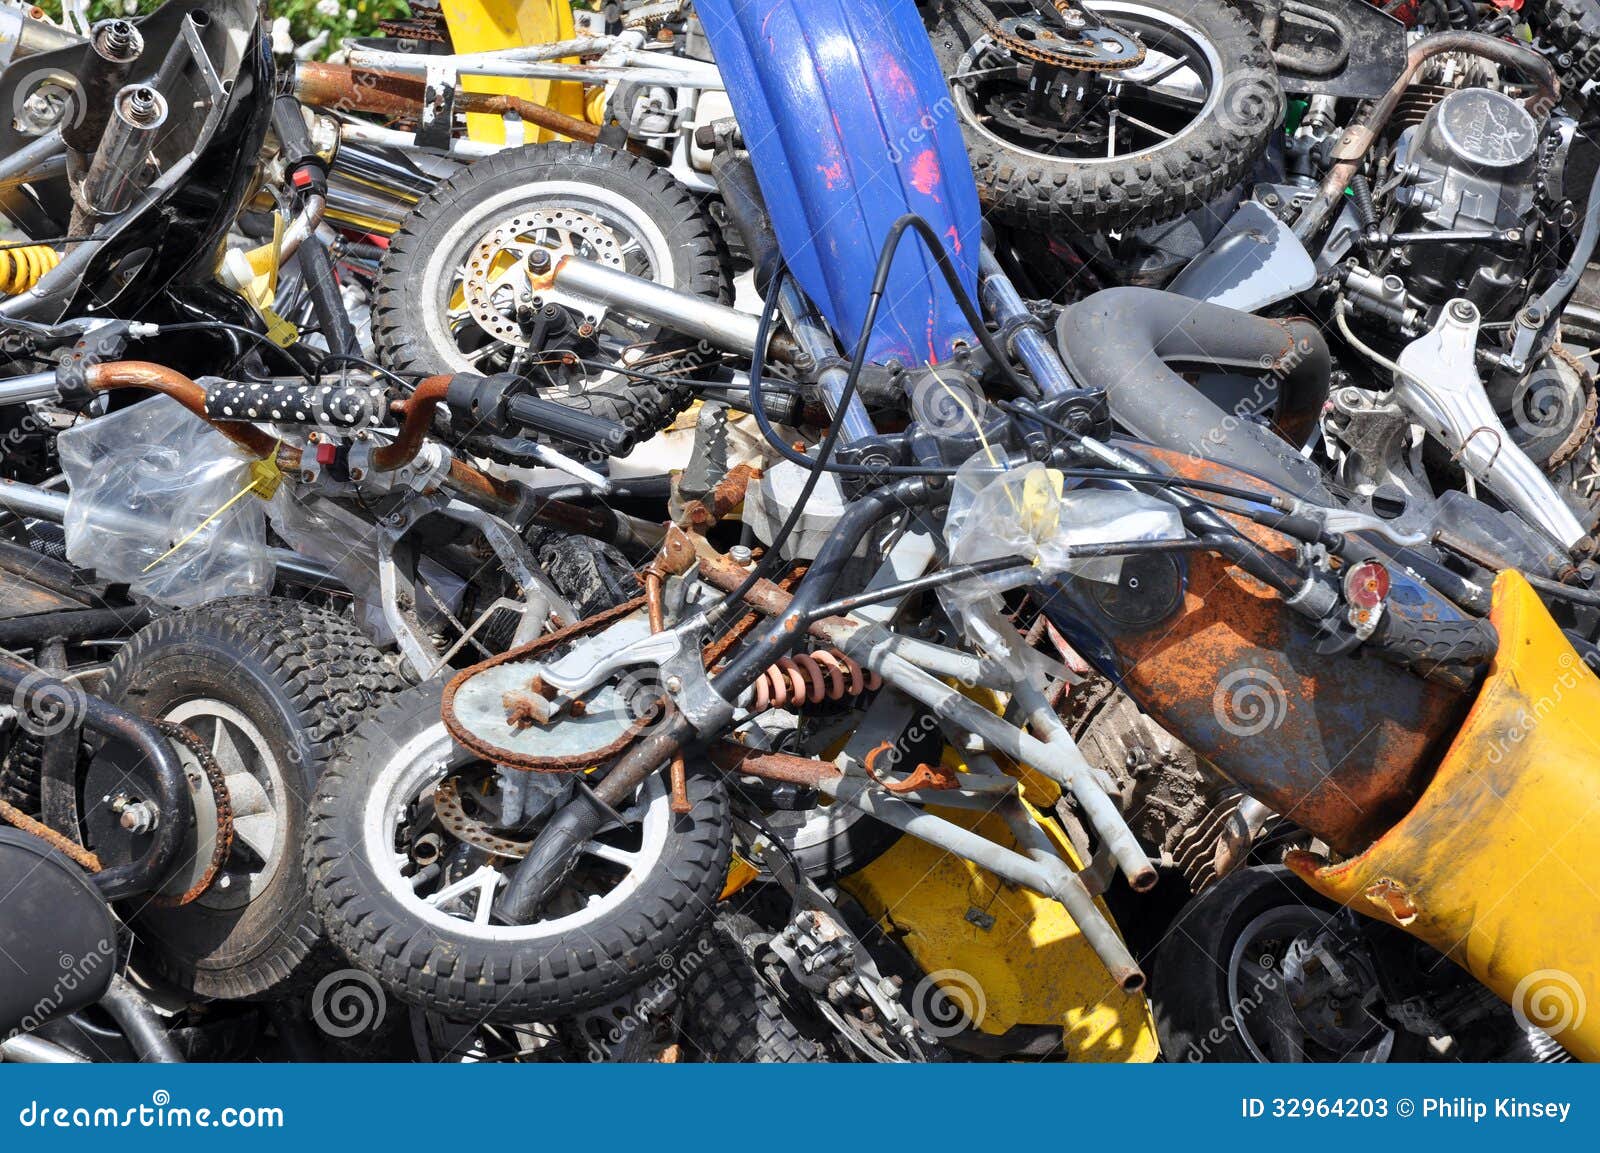 junk motorcycles for free